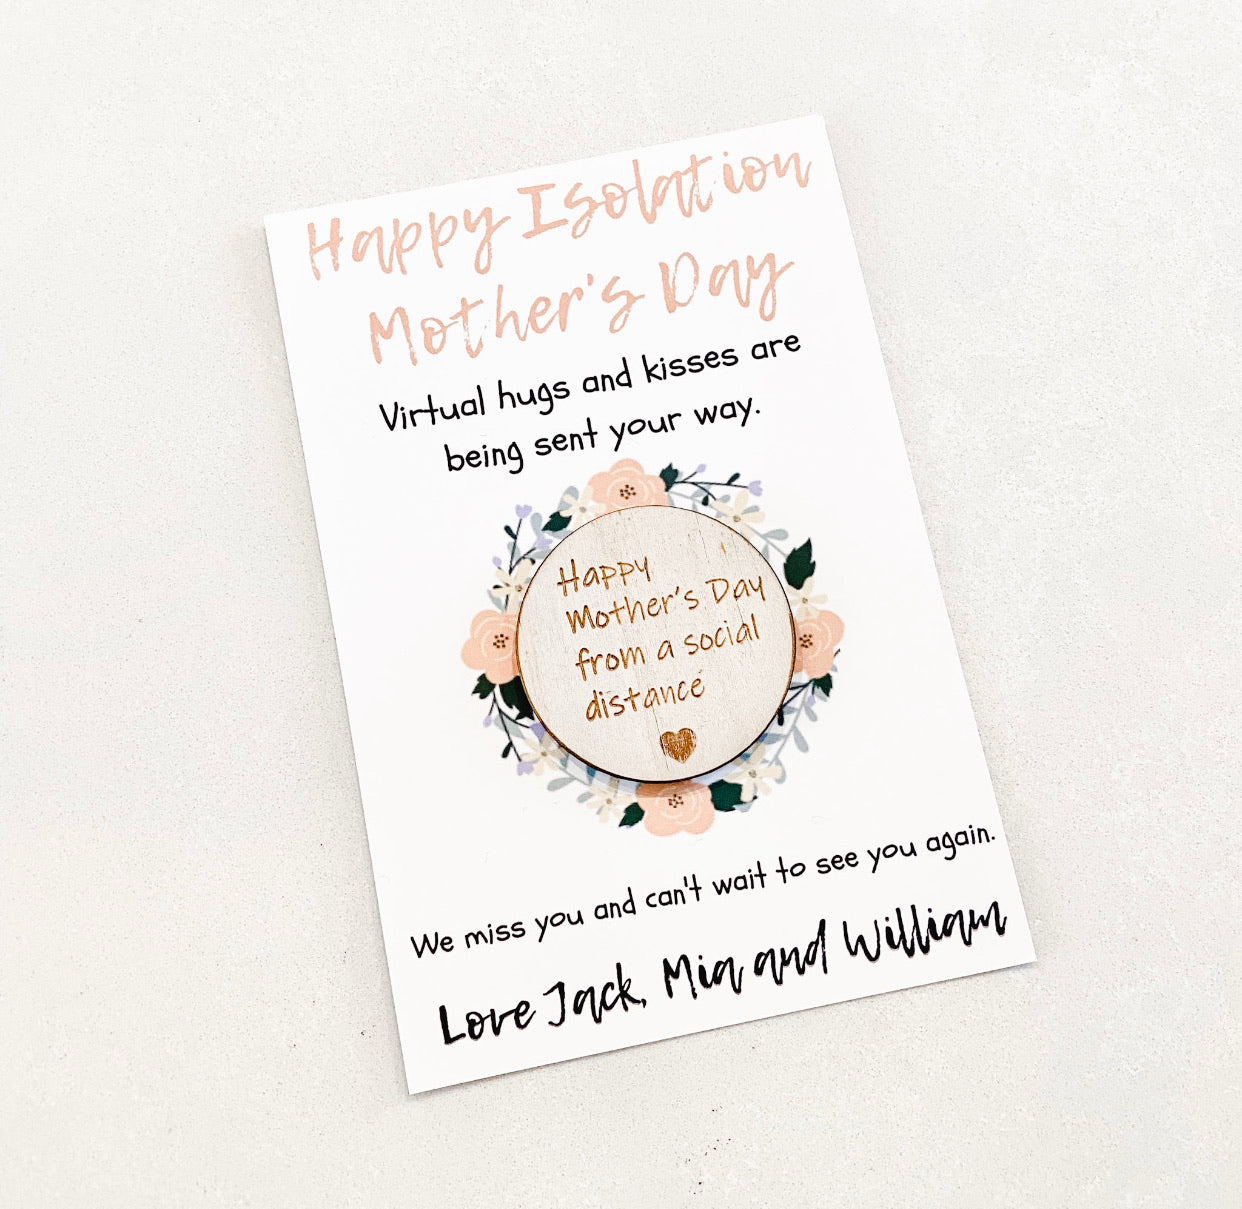 The Mother’s Day Isolation Card